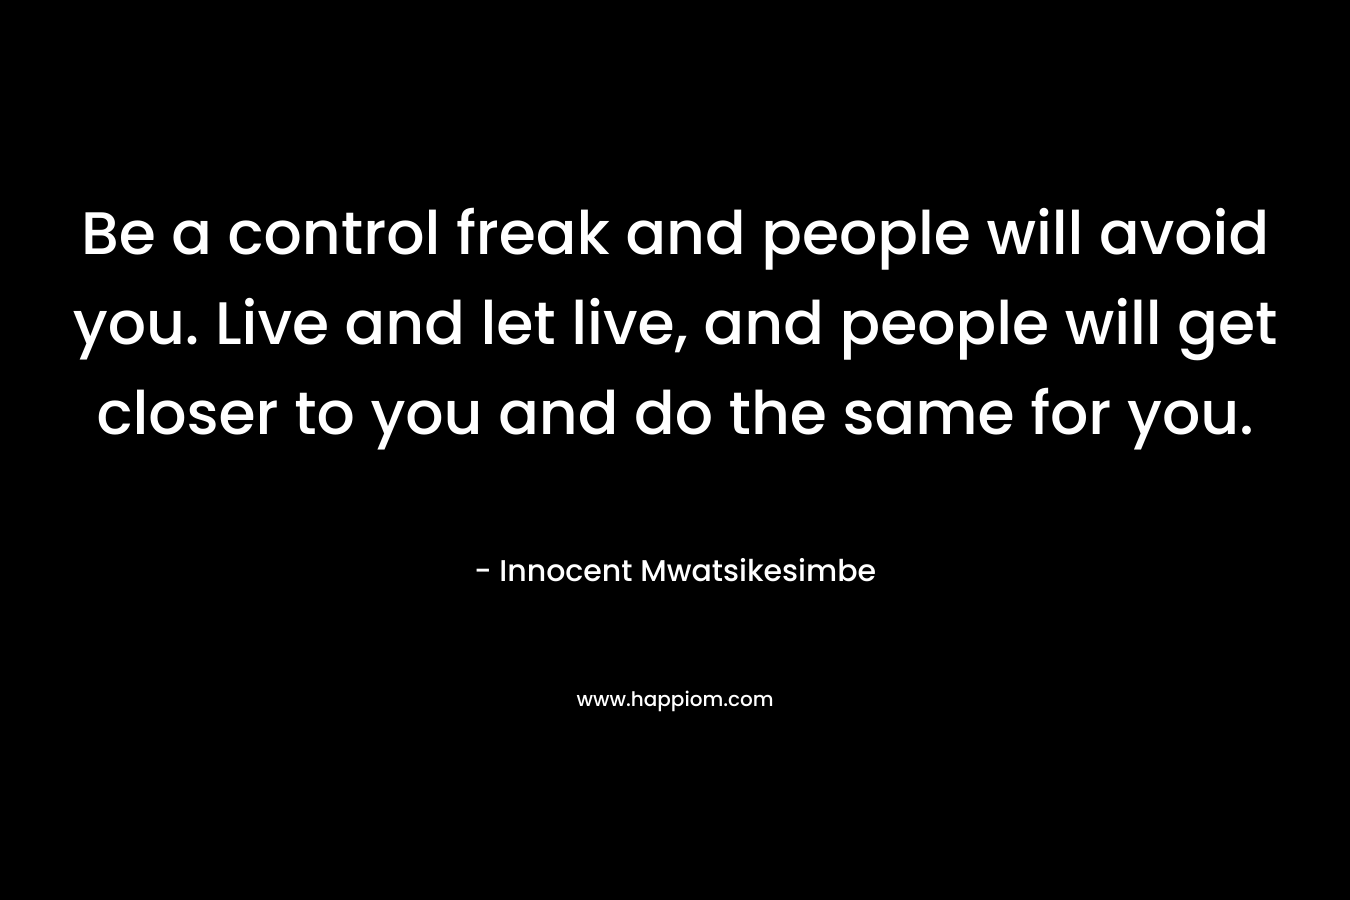 Be a control freak and people will avoid you. Live and let live, and people will get closer to you and do the same for you.